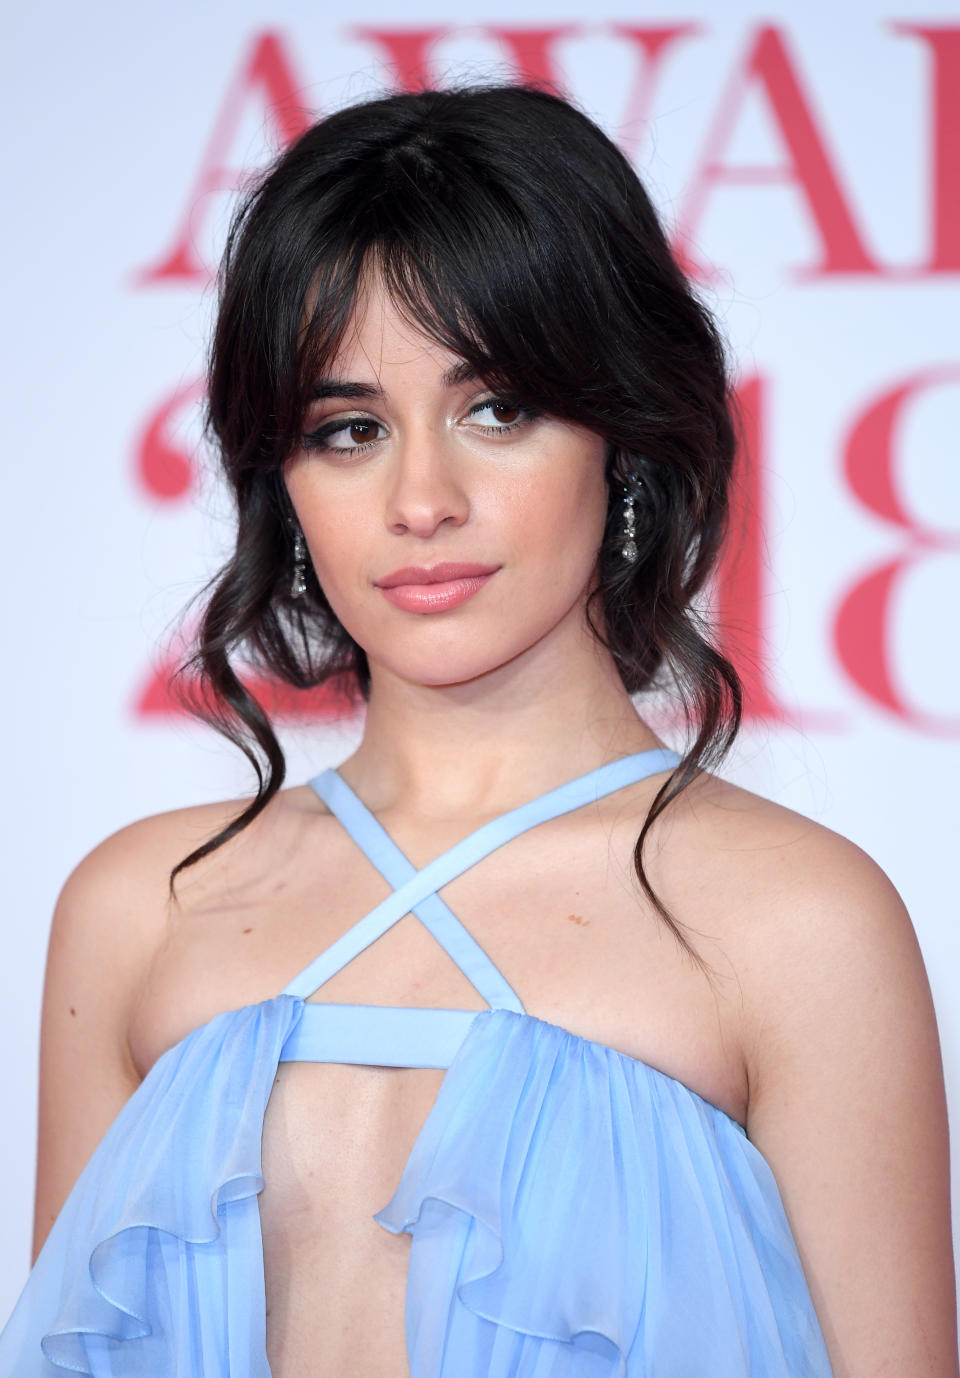 Camila Cabello on the red carpet in 2018 wearing a stylish, flowing dress with crisscross straps